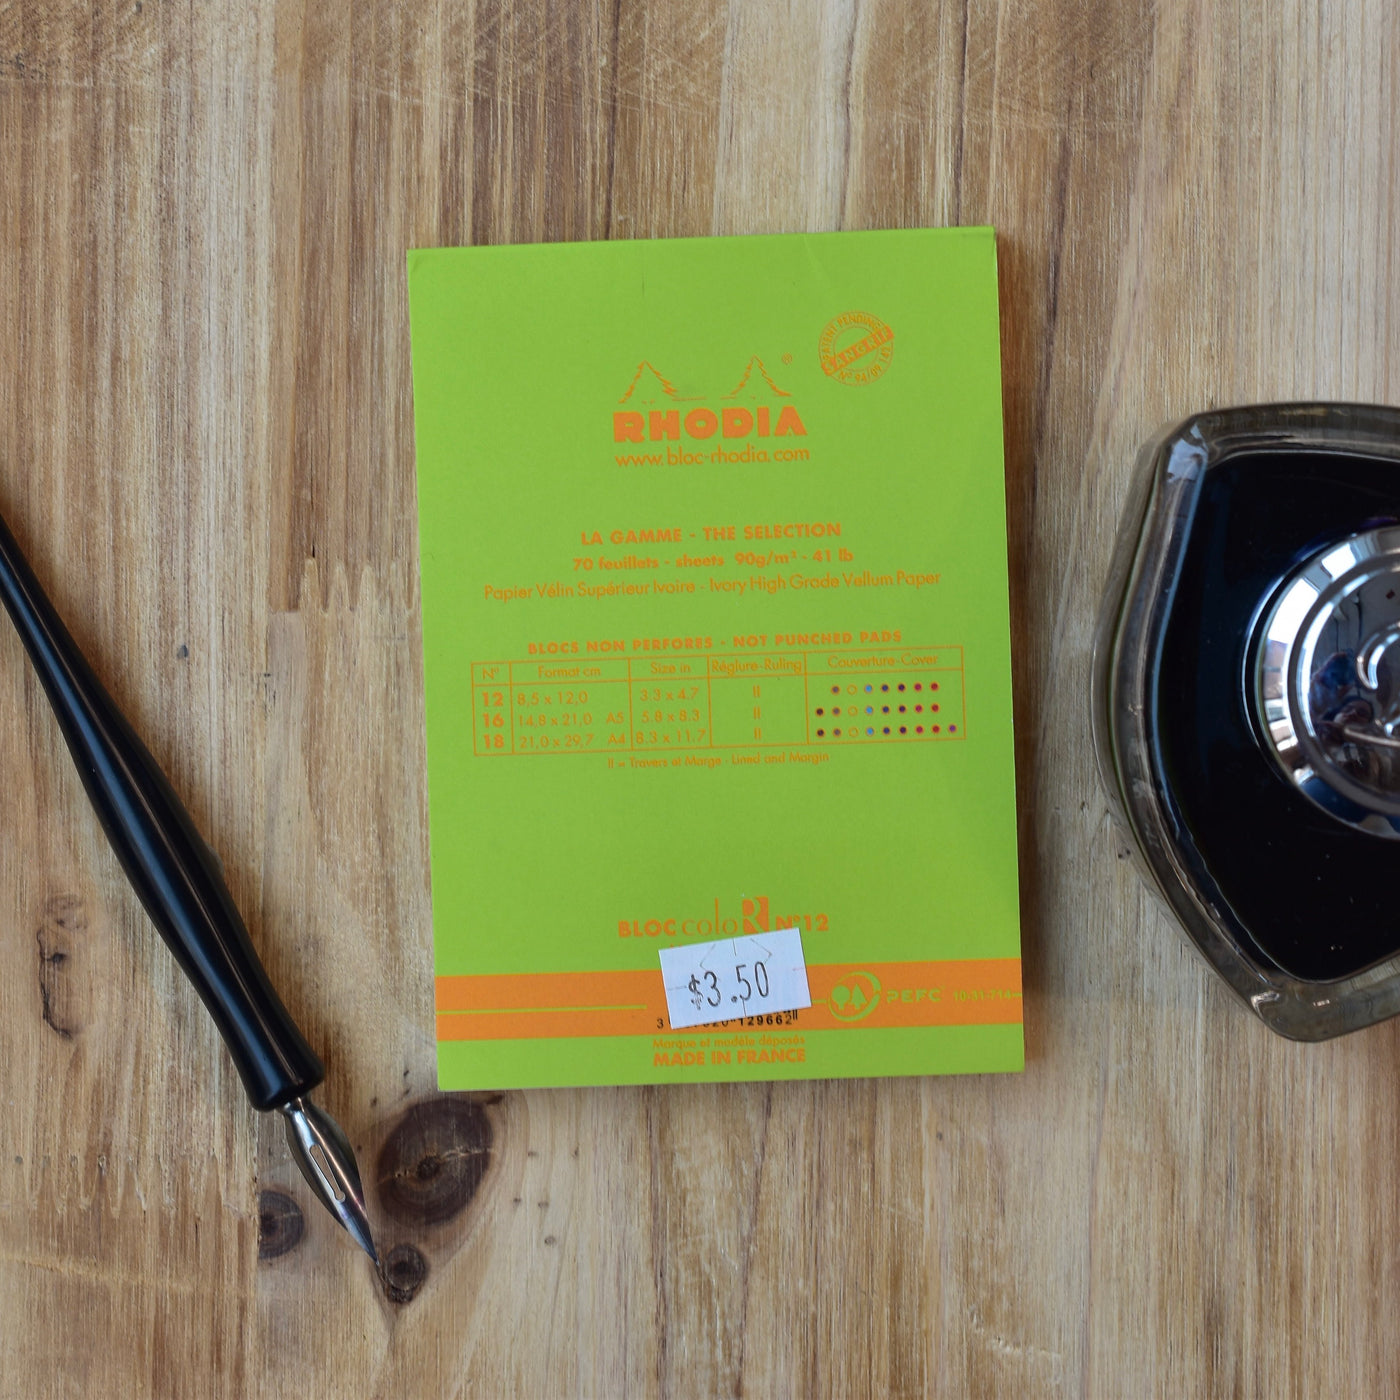 Rhodia No. 12 Premium Small Anise Lined Notepad